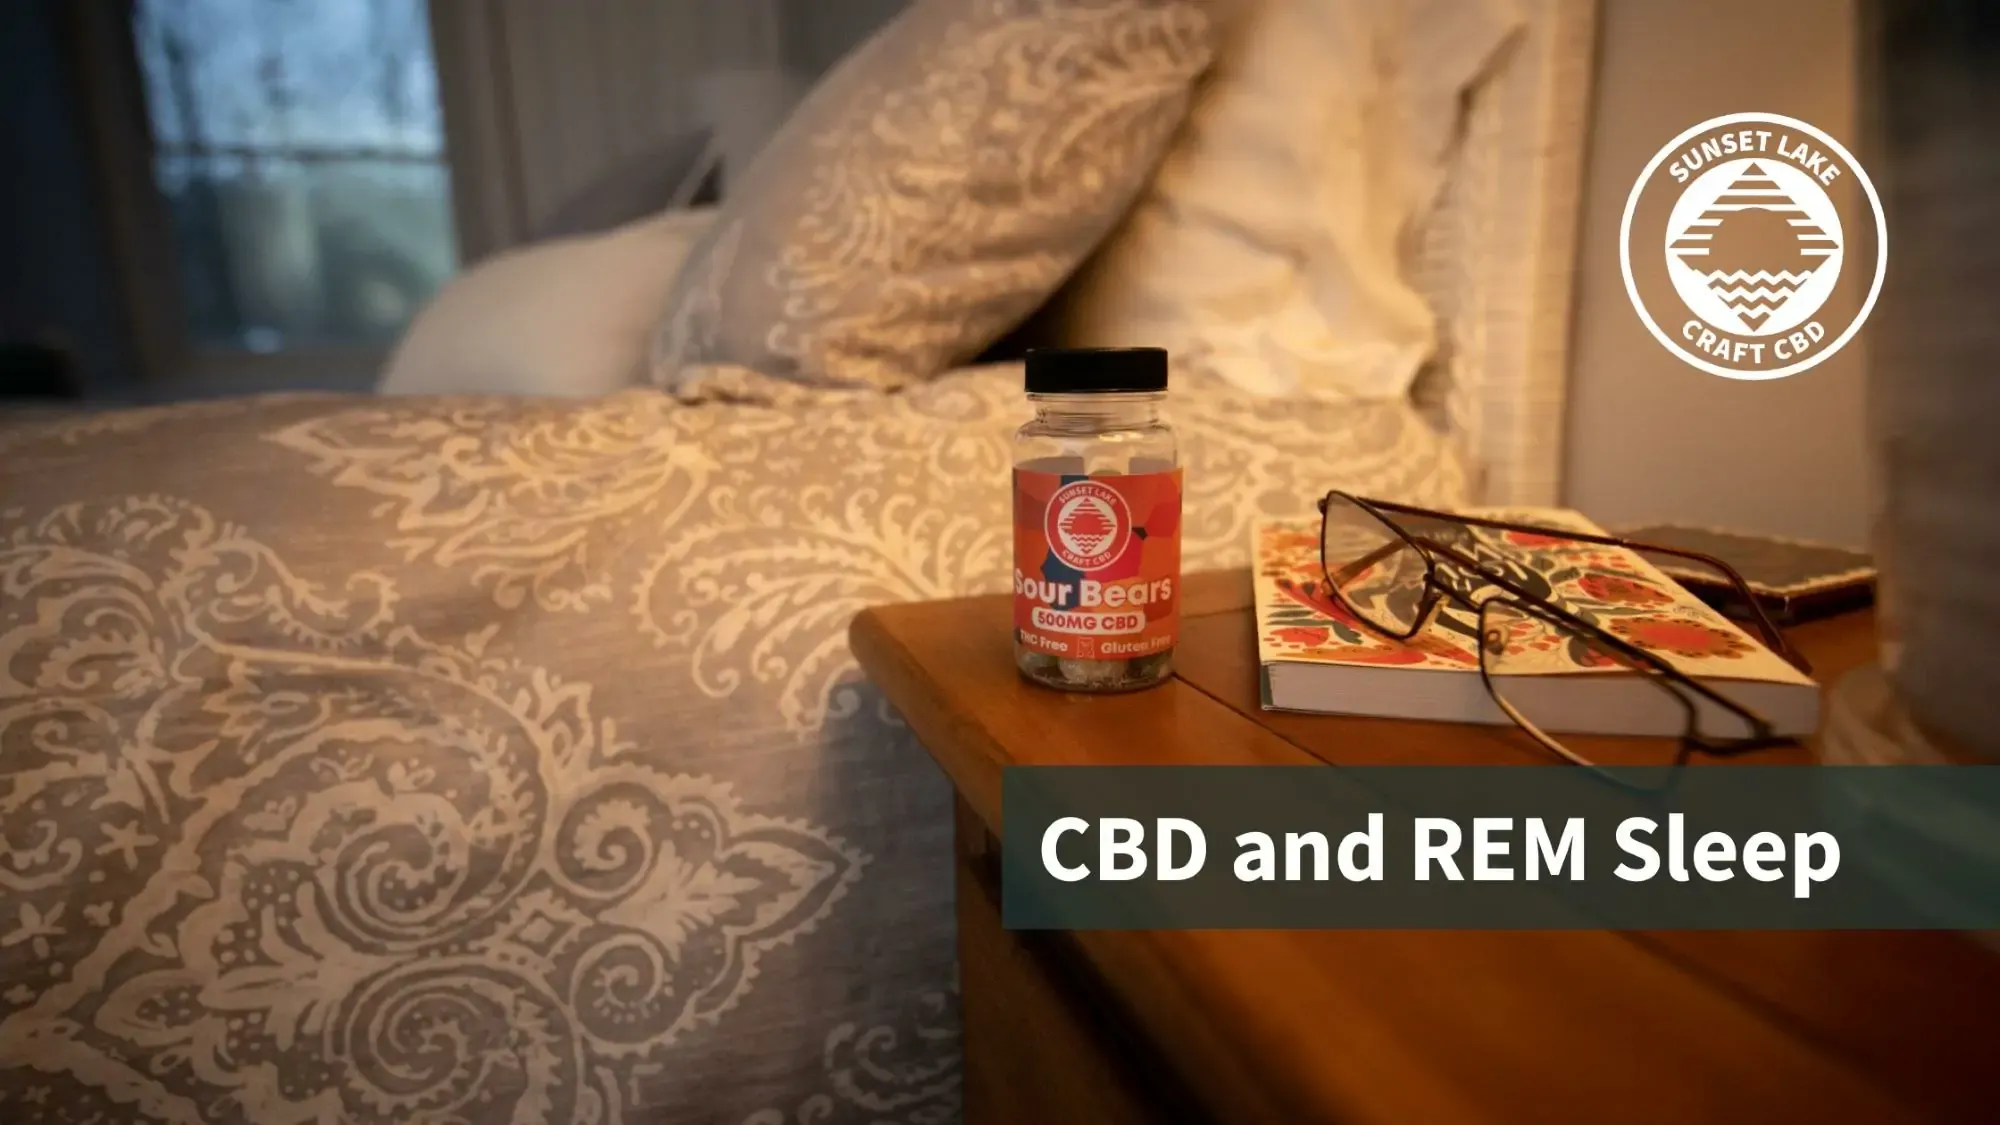 Bottle of CBD Gummies on a nightstand with the text "CBD and REM sleep"